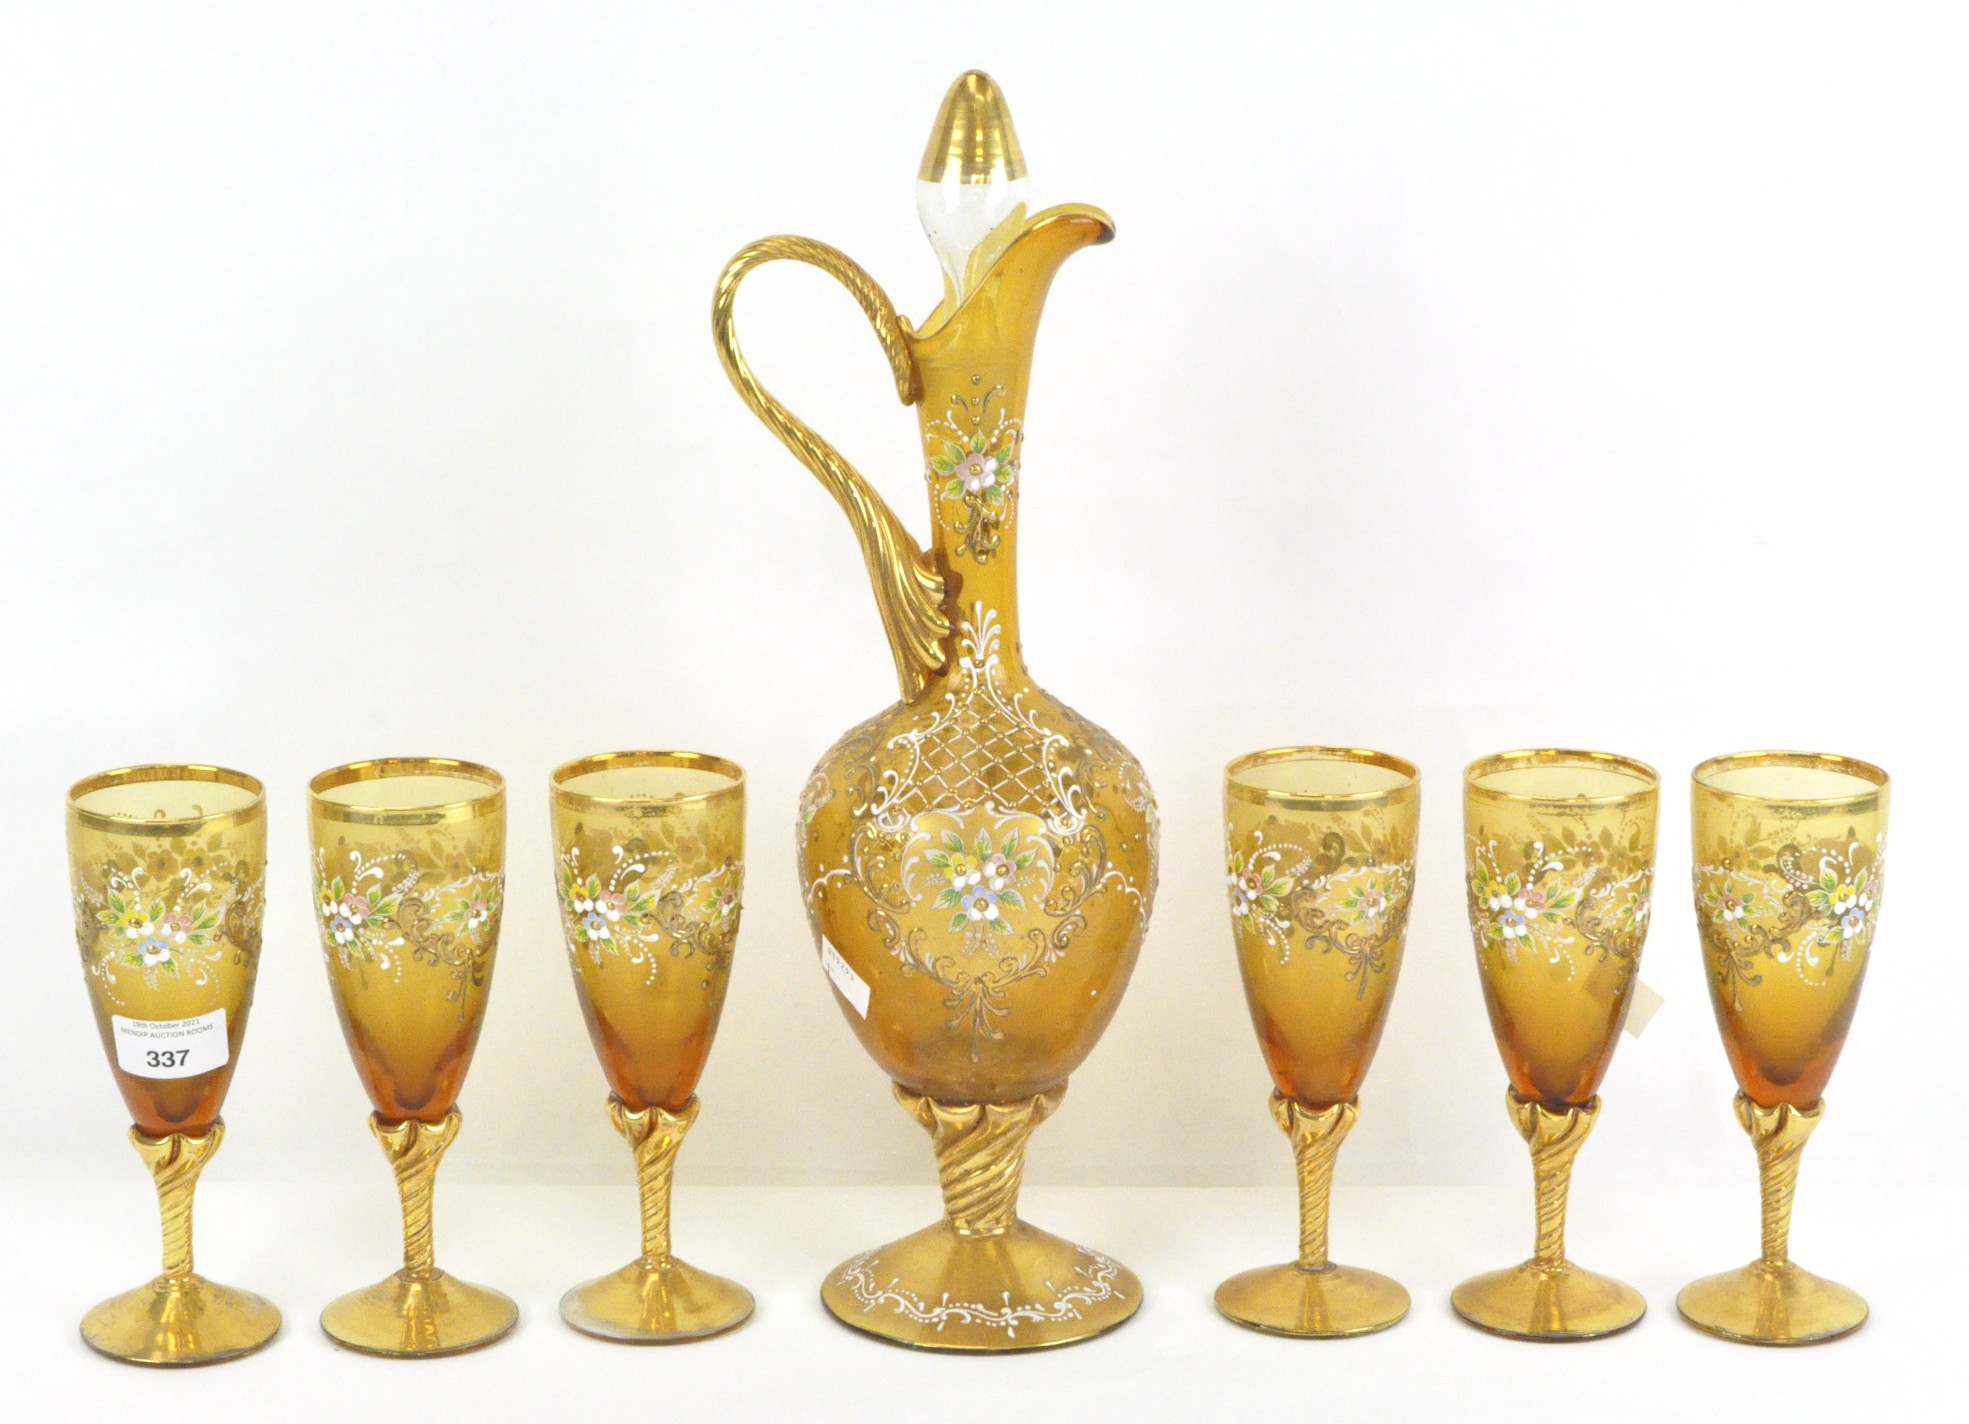 A Facon de Venise style jewelled and enamelled glass ewer and stopper and six wine glasses,